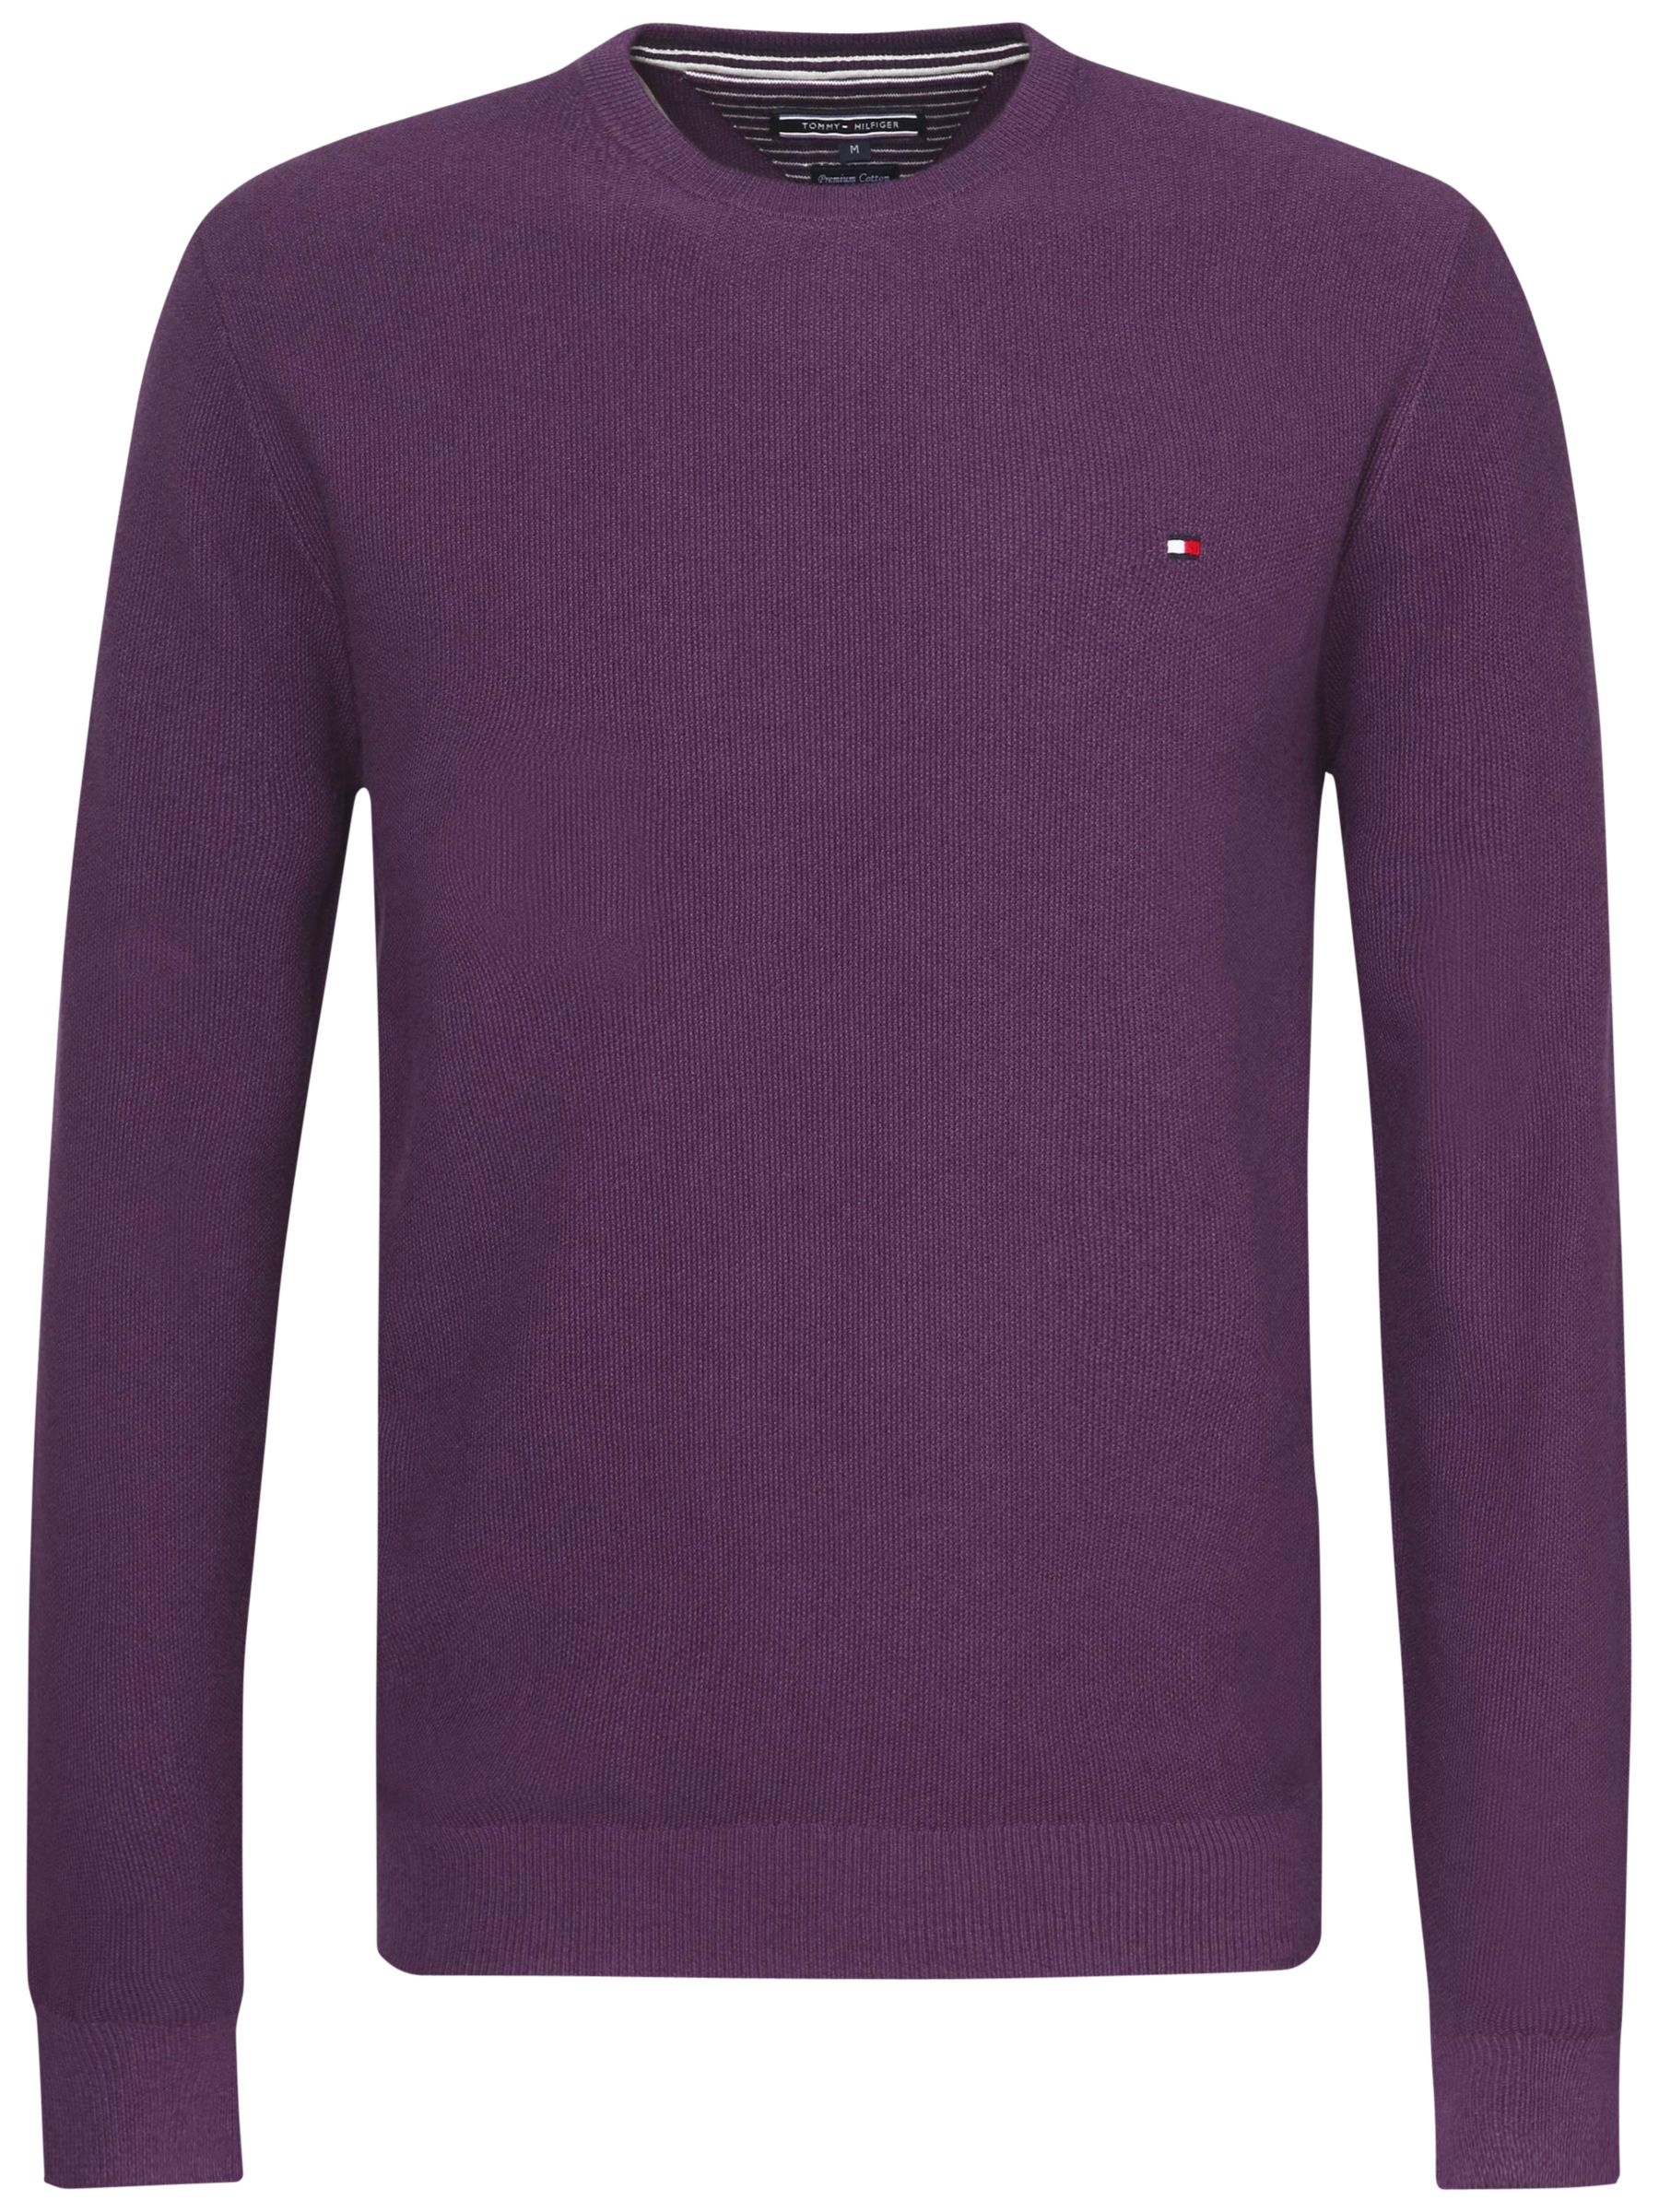 Tommy Hilfiger Twisted Cotton Crew Neck 